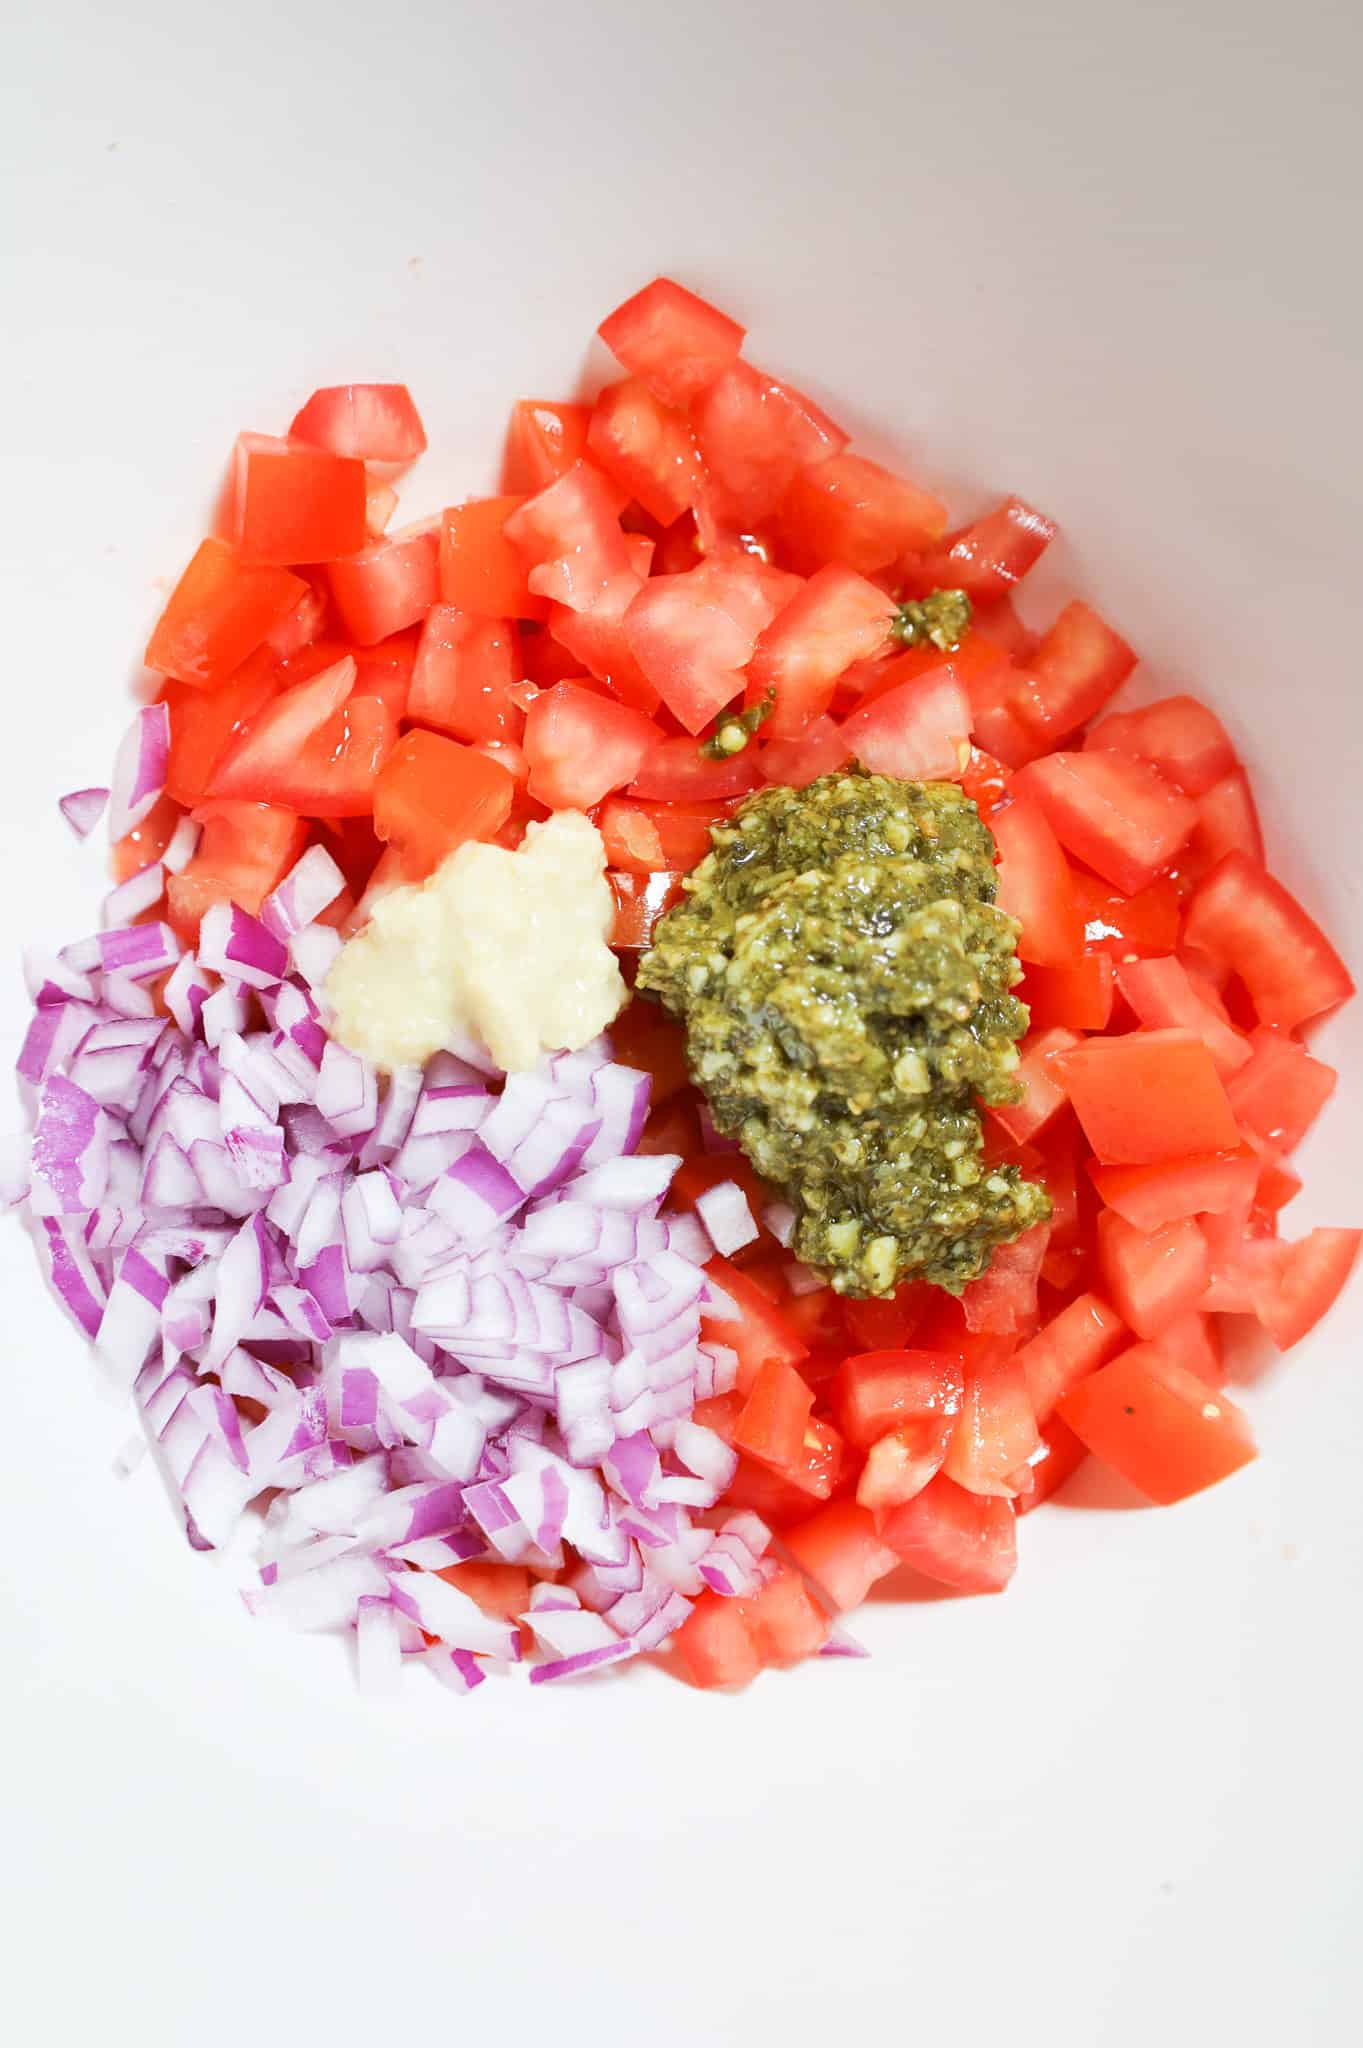 garlic puree, basil pesto, diced tomatoes and diced red onions in a mixing bowl